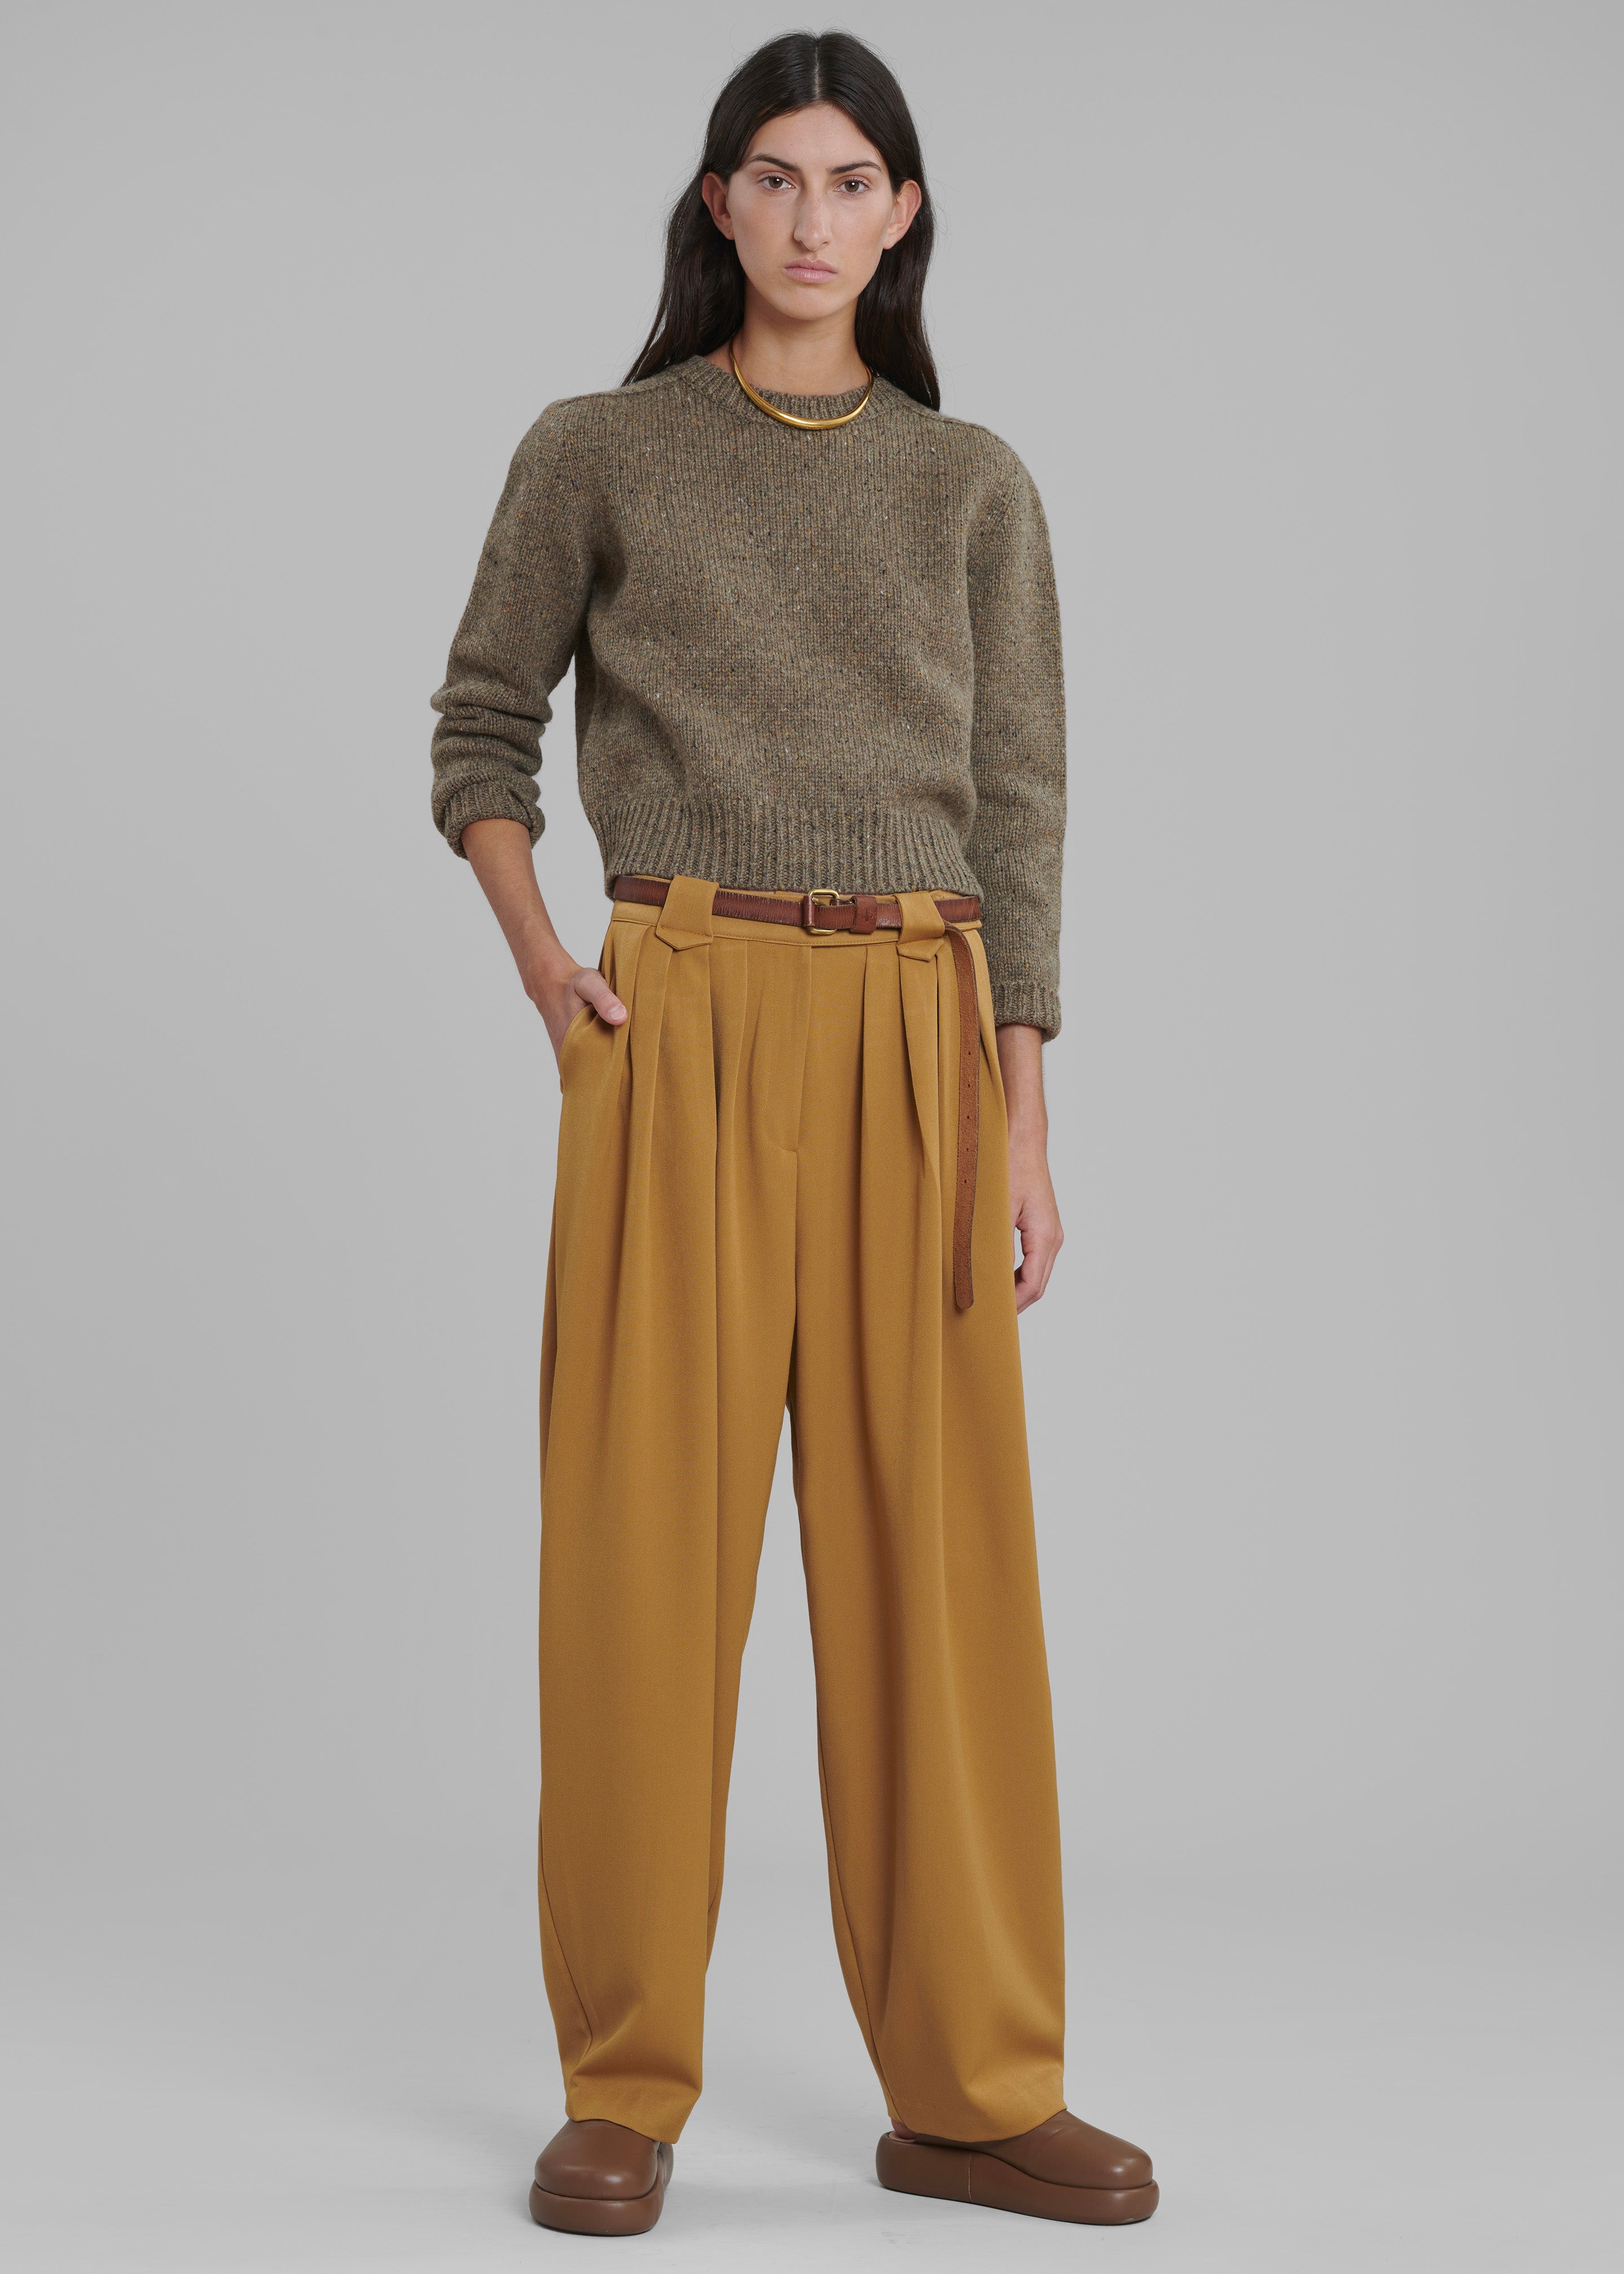 Luce Pleated Pants - Ginger - 4